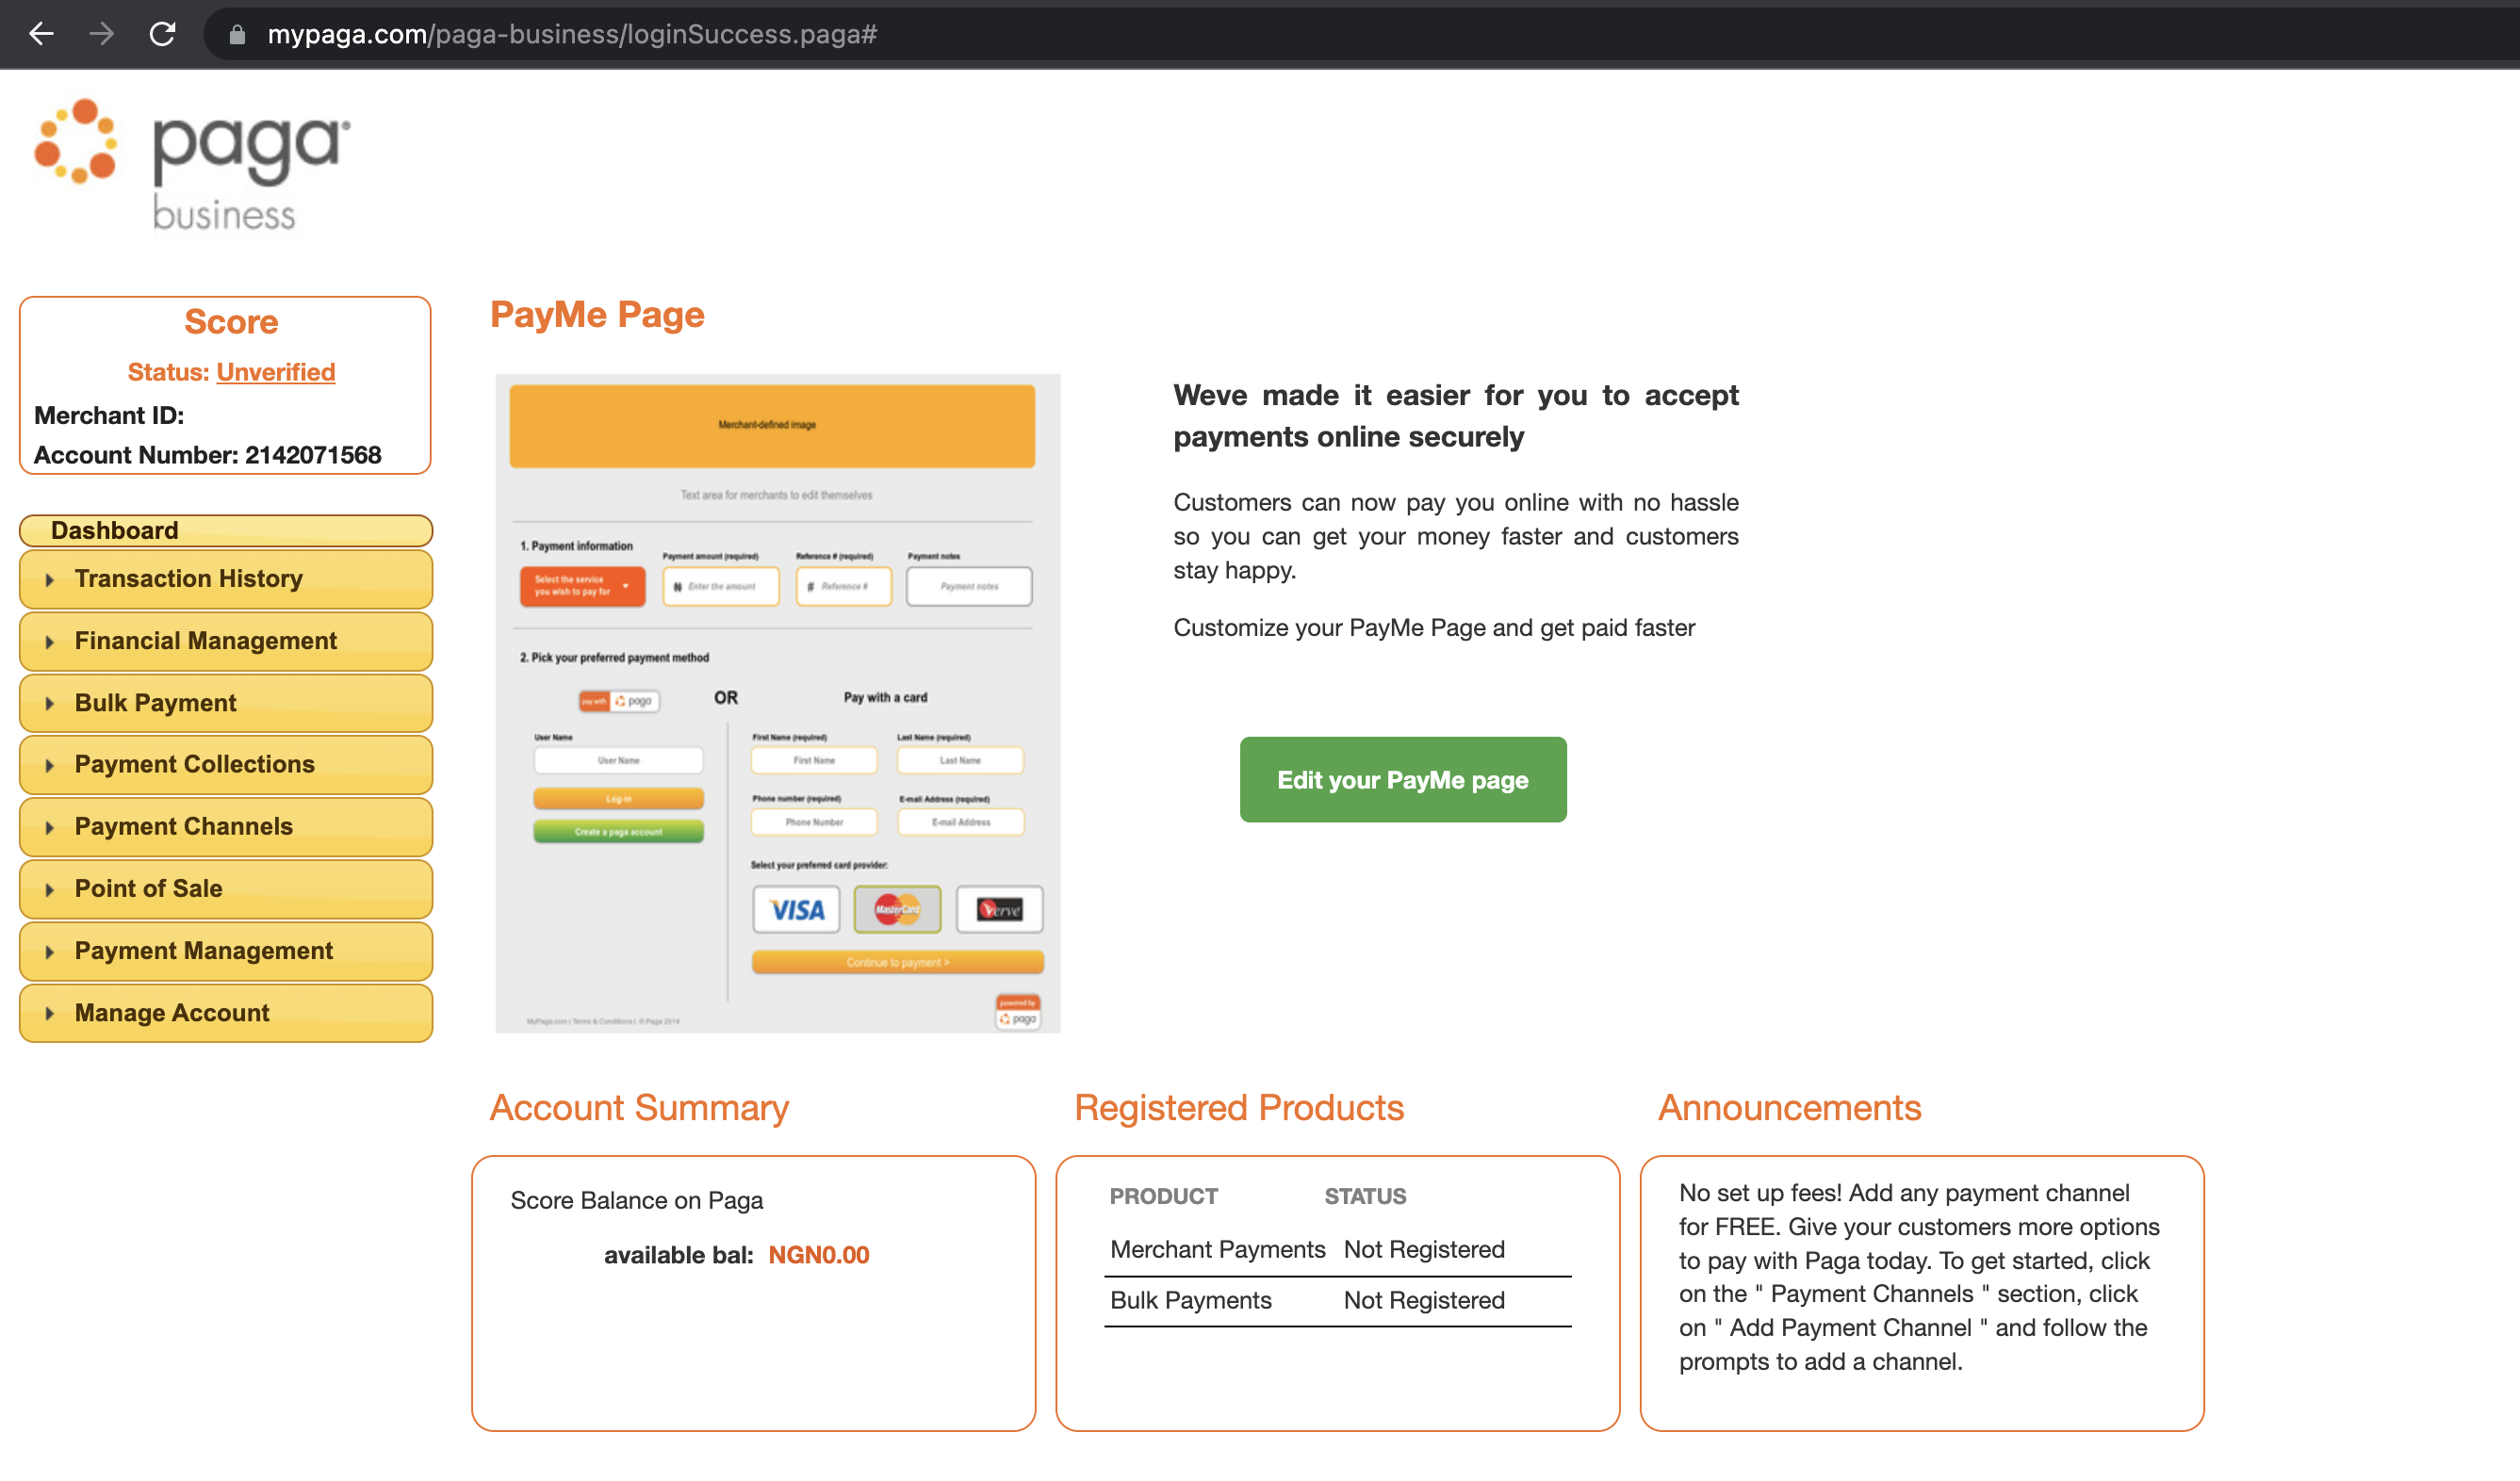 Image 2. 
This dashboard gives you everything you need to manage Paga PaaS offerings.